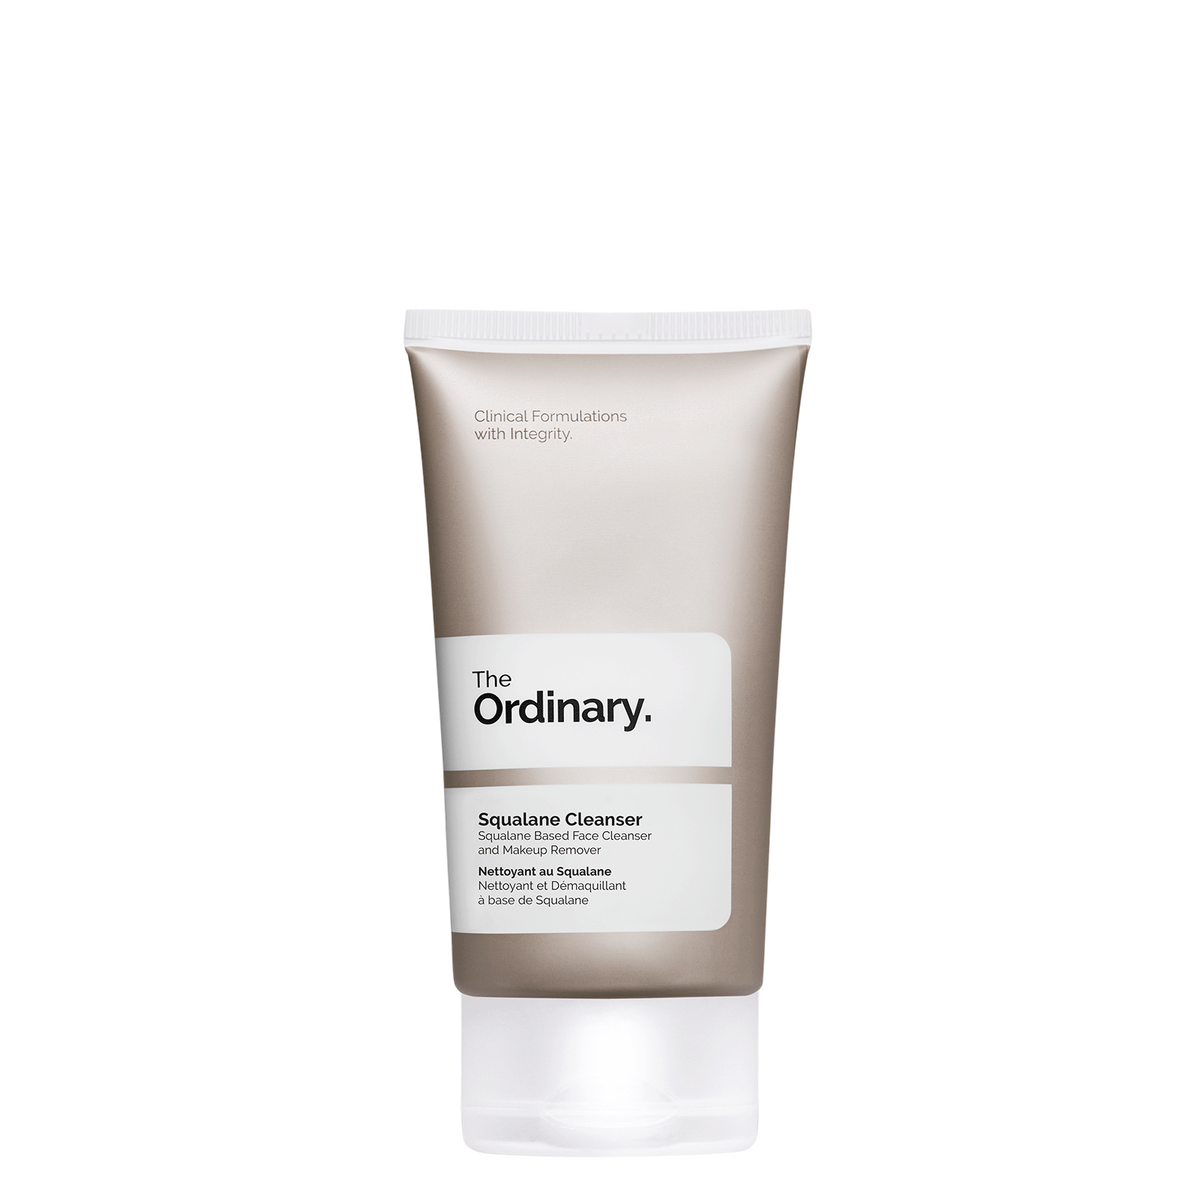 Squalane Cleanser (50 ml) - The Ordinary The Ordinary